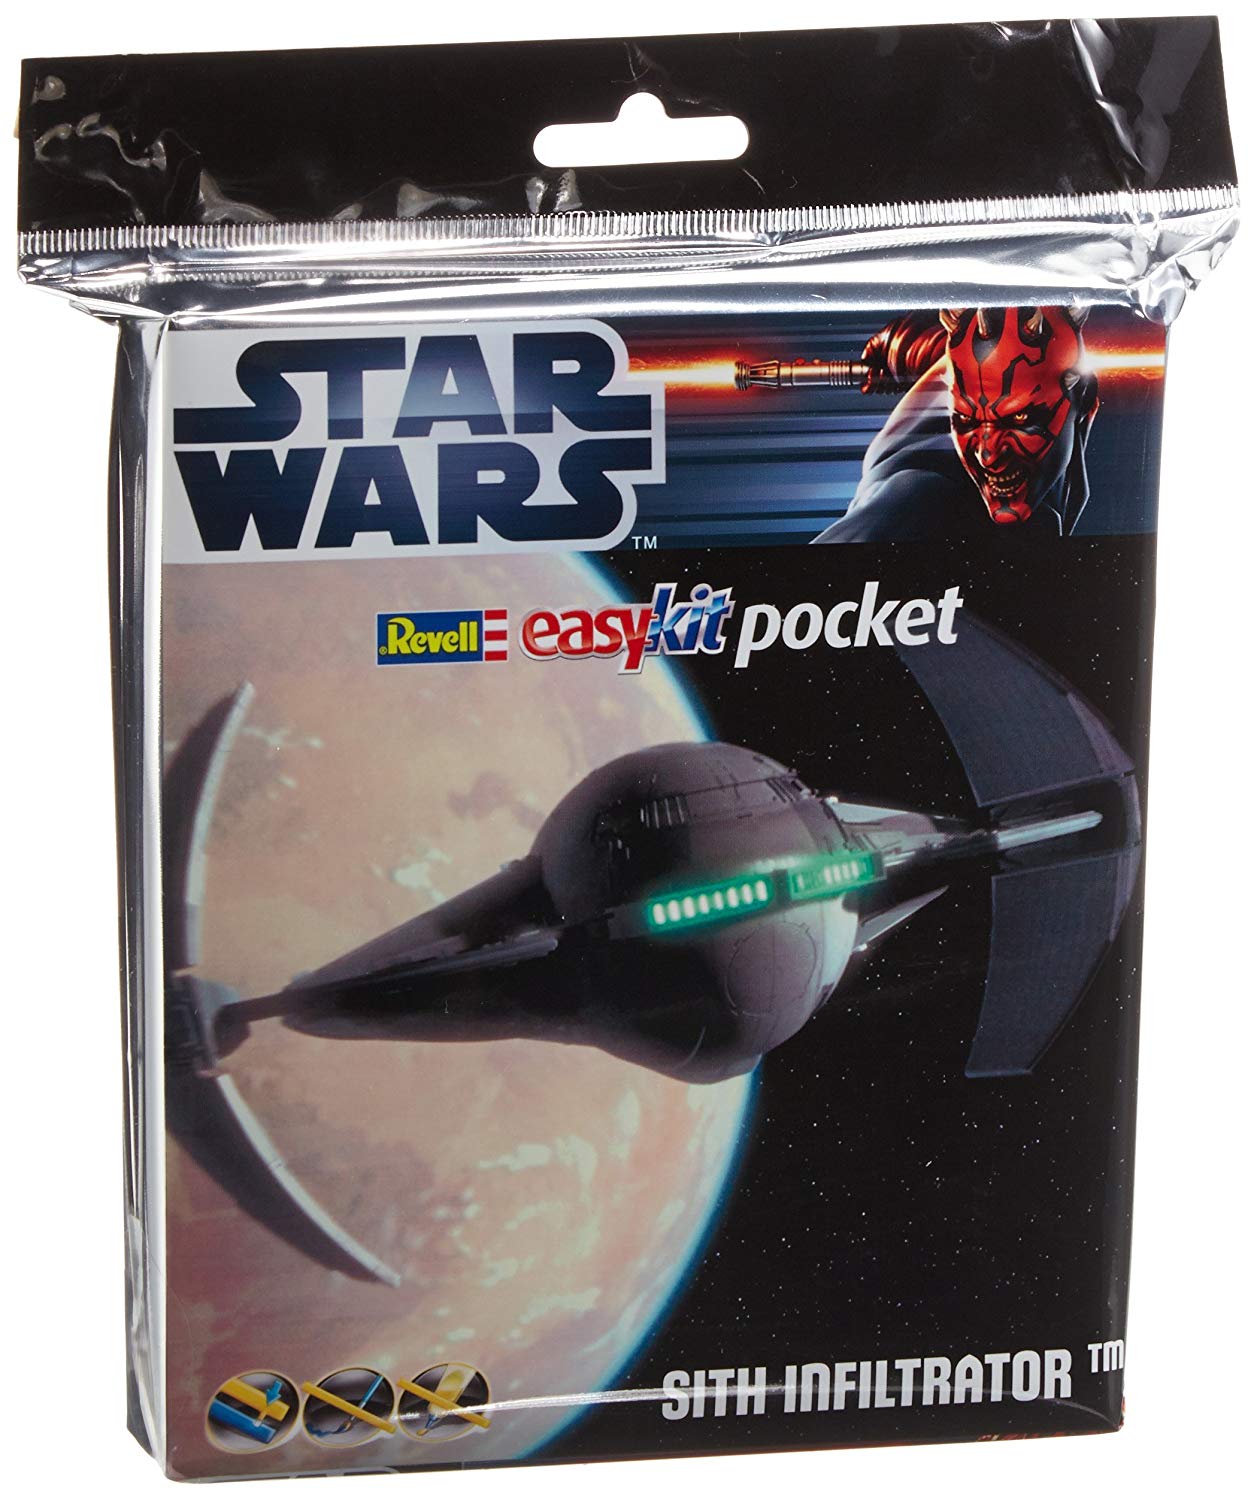 Revell Scale Sith Infiltrator Pocket